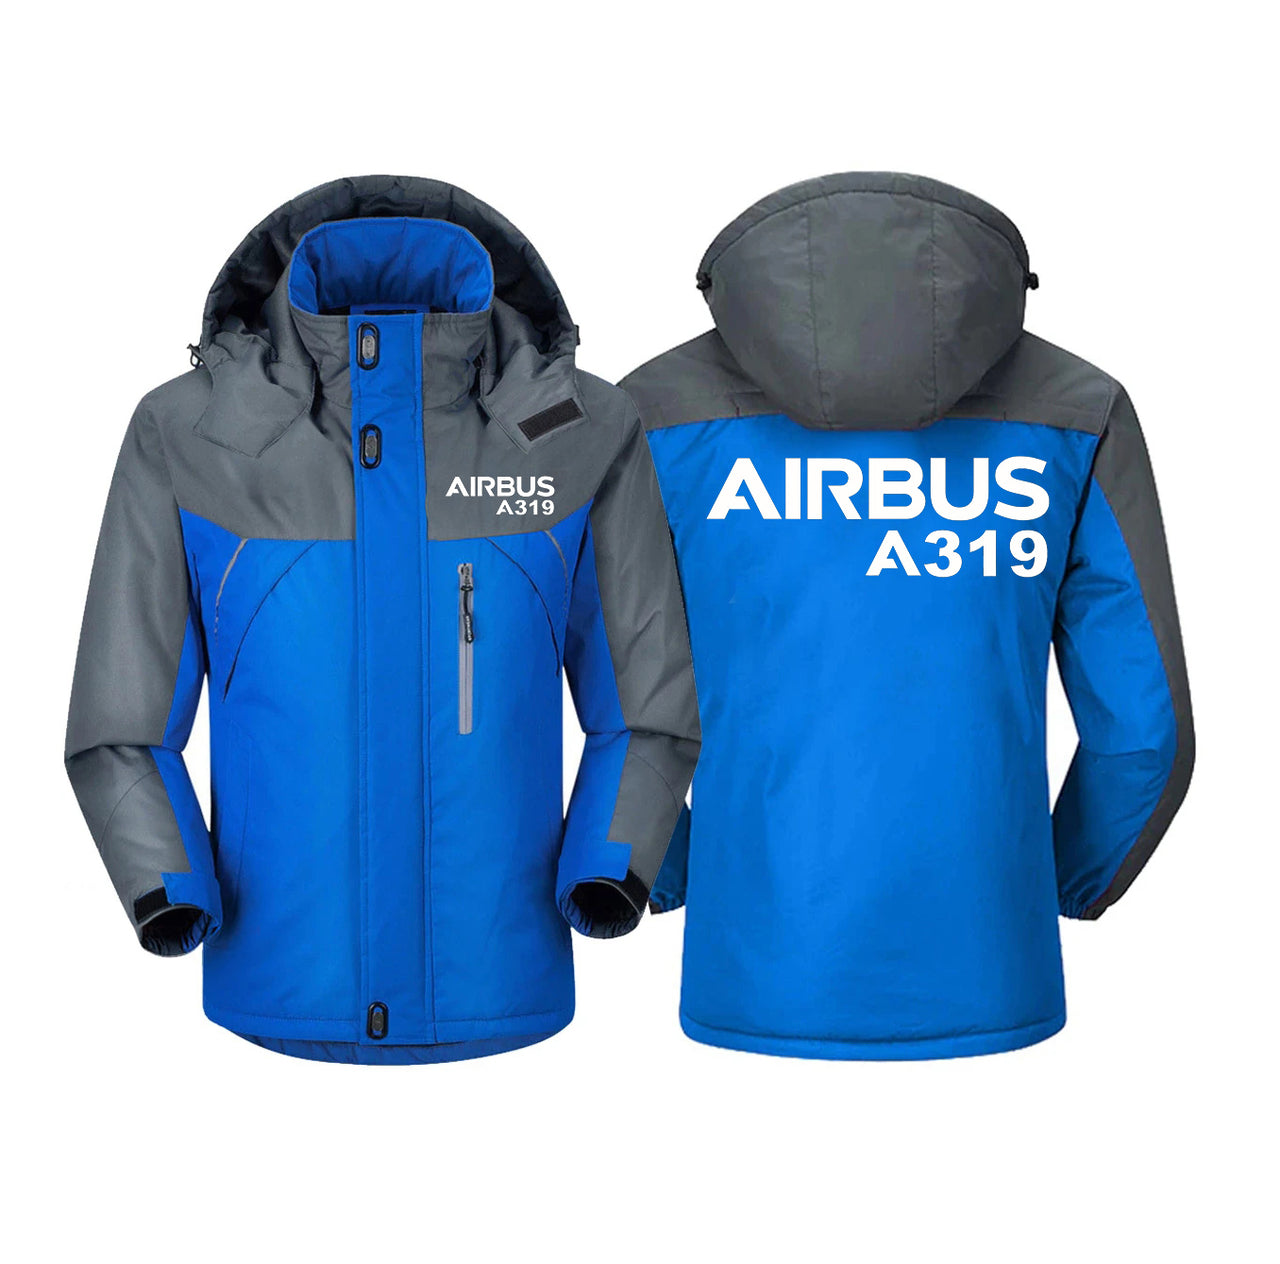 Airbus A319 & Text Designed Thick Winter Jackets